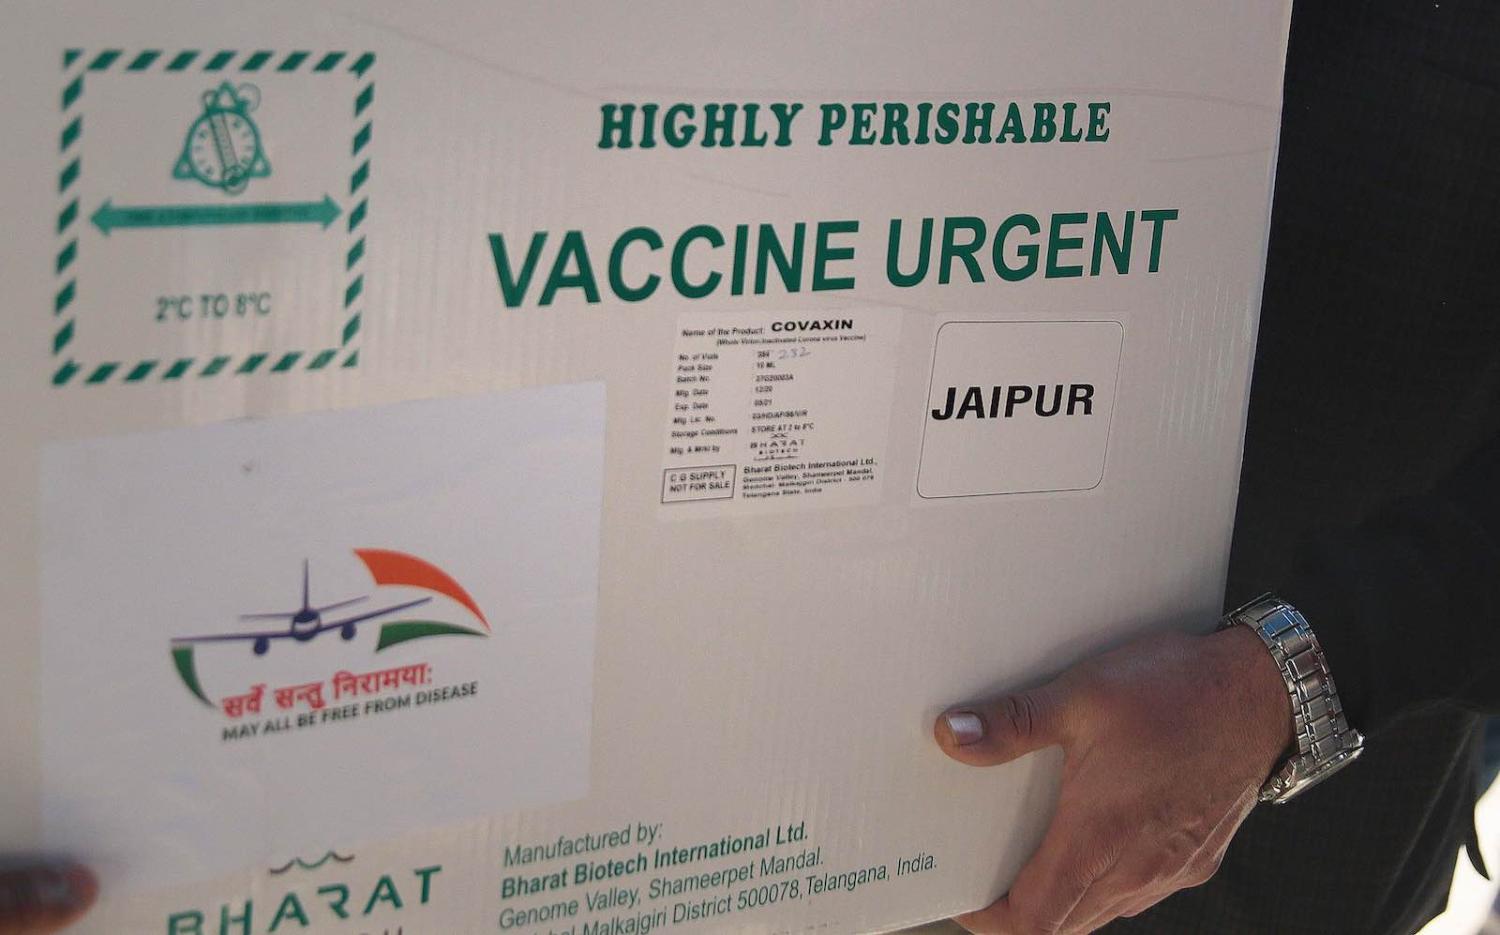 Delivery of the first consignment of 1000 vials of Bharat Biotech’s COVAXIN arrived to start Covid-19 vaccination drive from January 16, at State Vaccine Centre on January 13, 2021 in Jaipur, India (Himanshu Vyas/Hindustan Times via Getty Images)